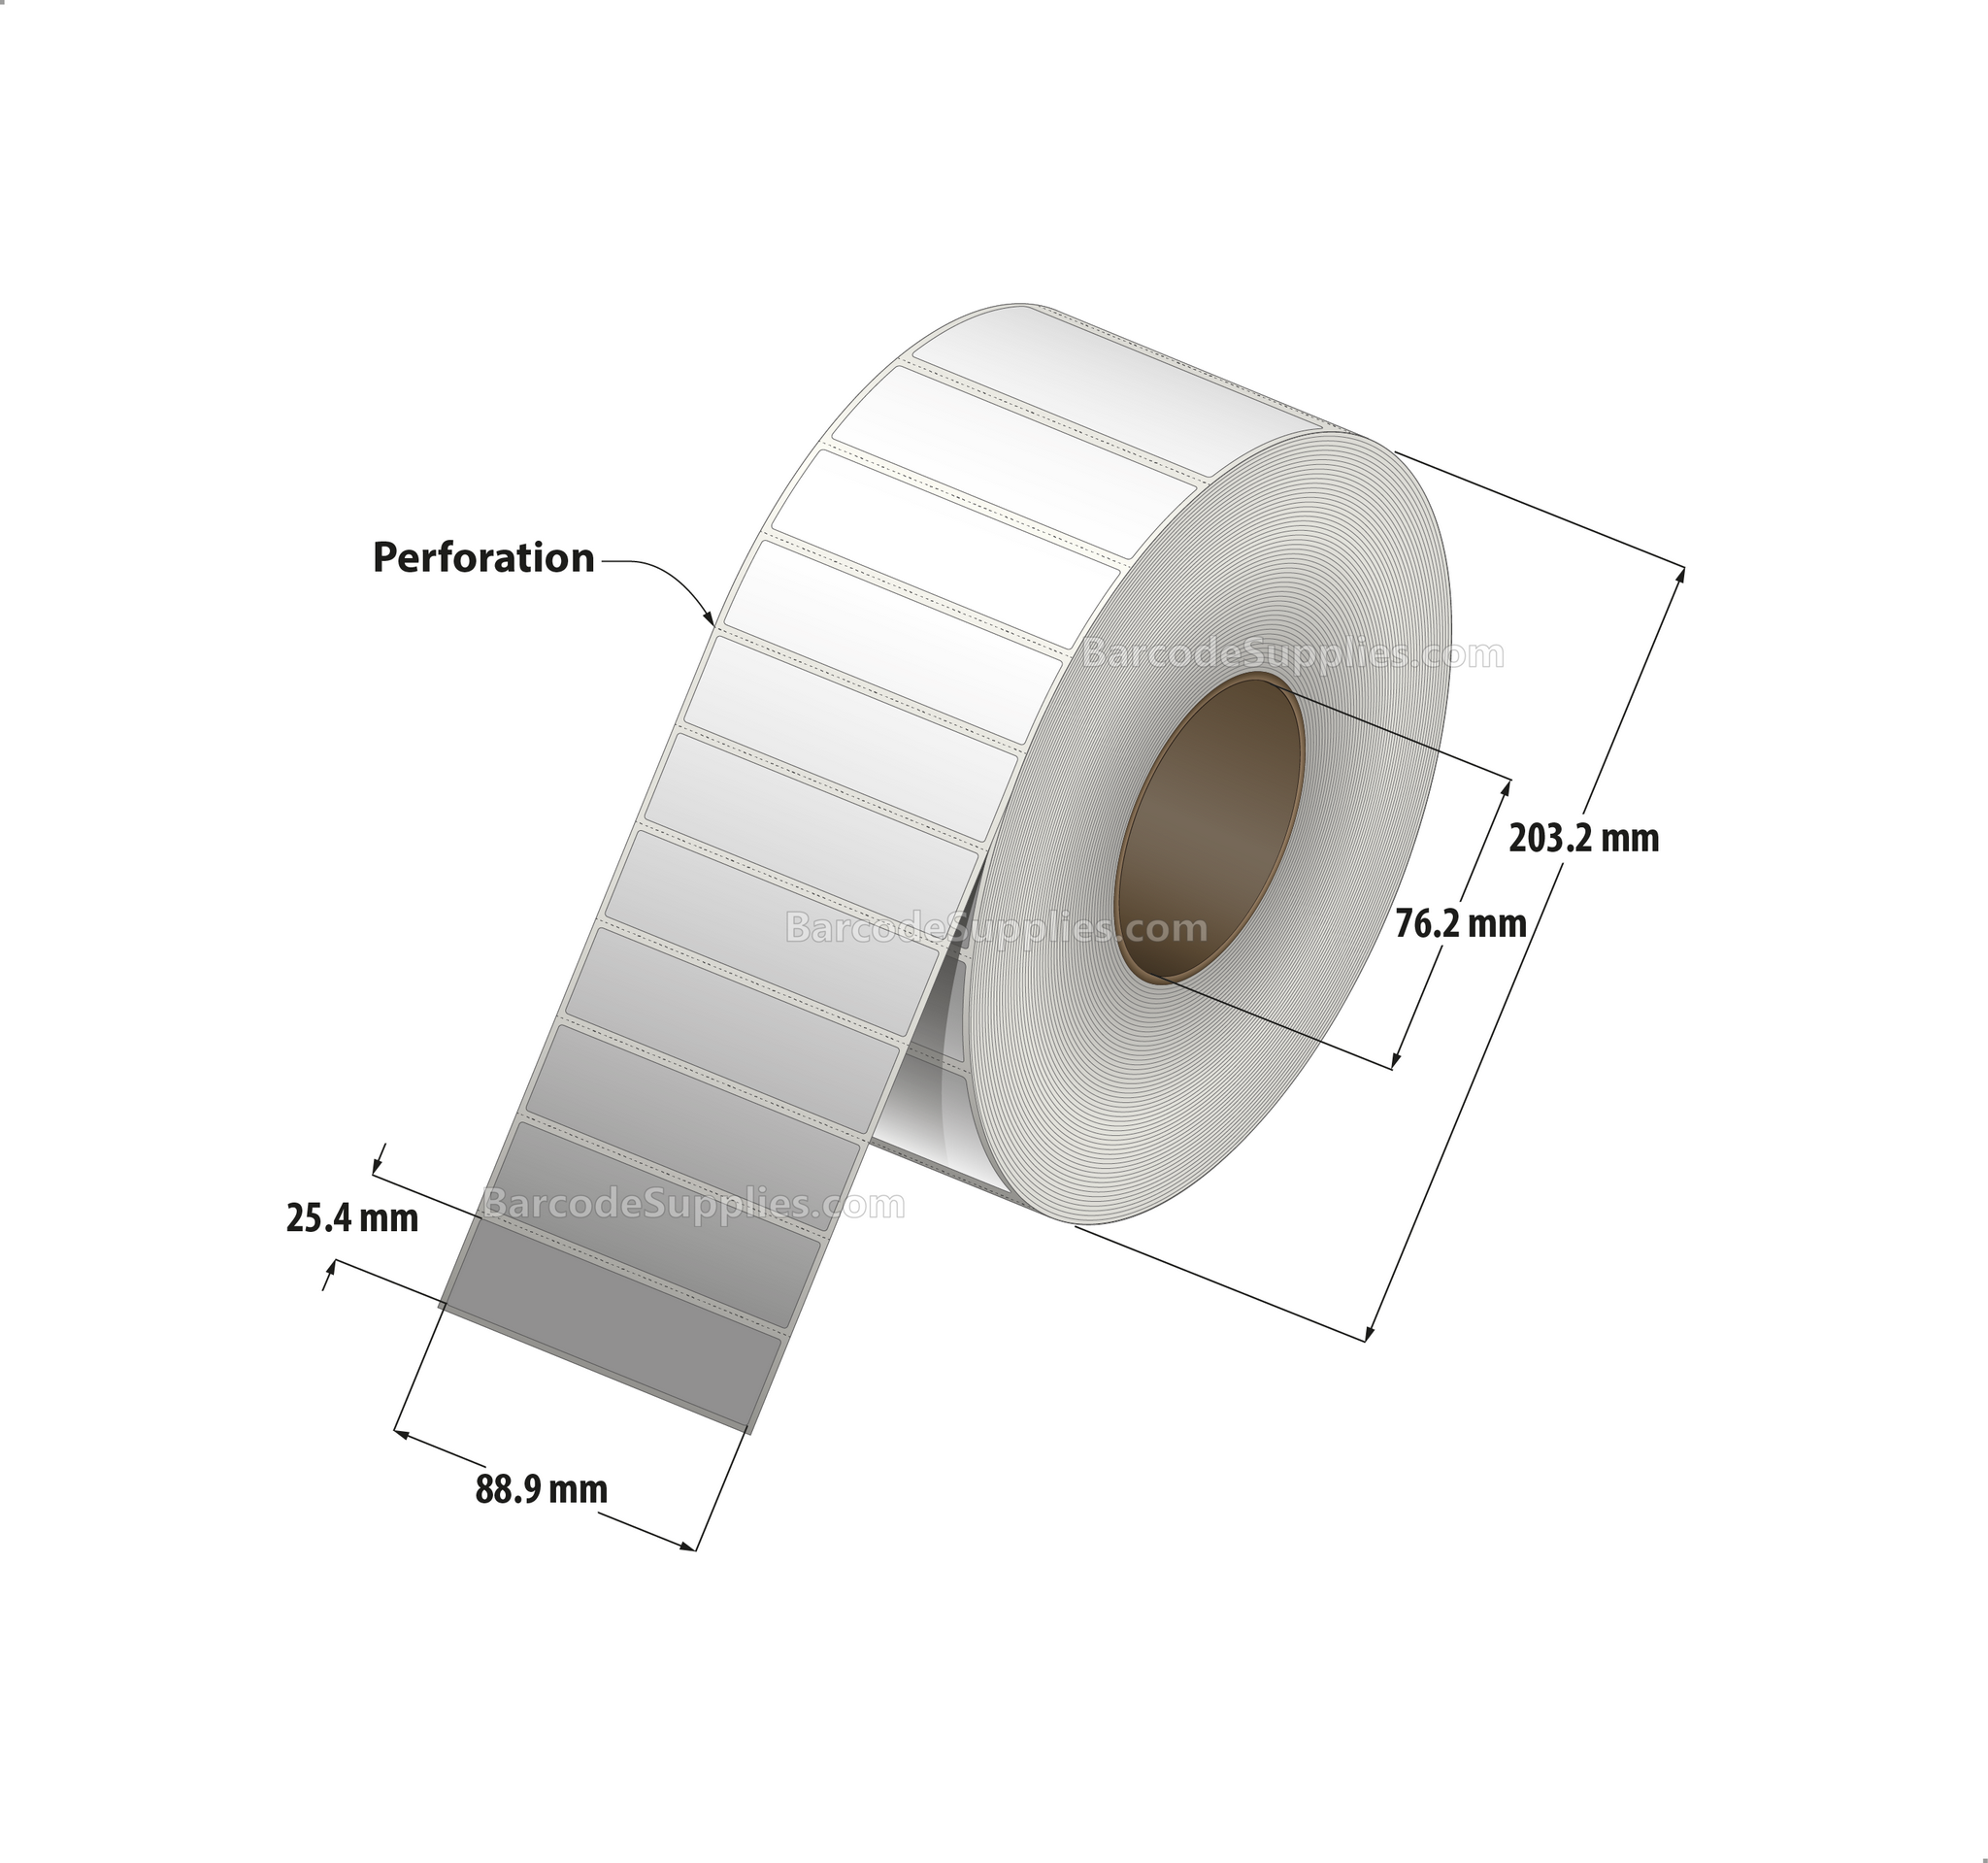 3.5 x 1 Thermal Transfer White Labels With Permanent Adhesive - Perforated - 5500 Labels Per Roll - Carton Of 4 Rolls - 22000 Labels Total - MPN: RT-35-1-5500-3